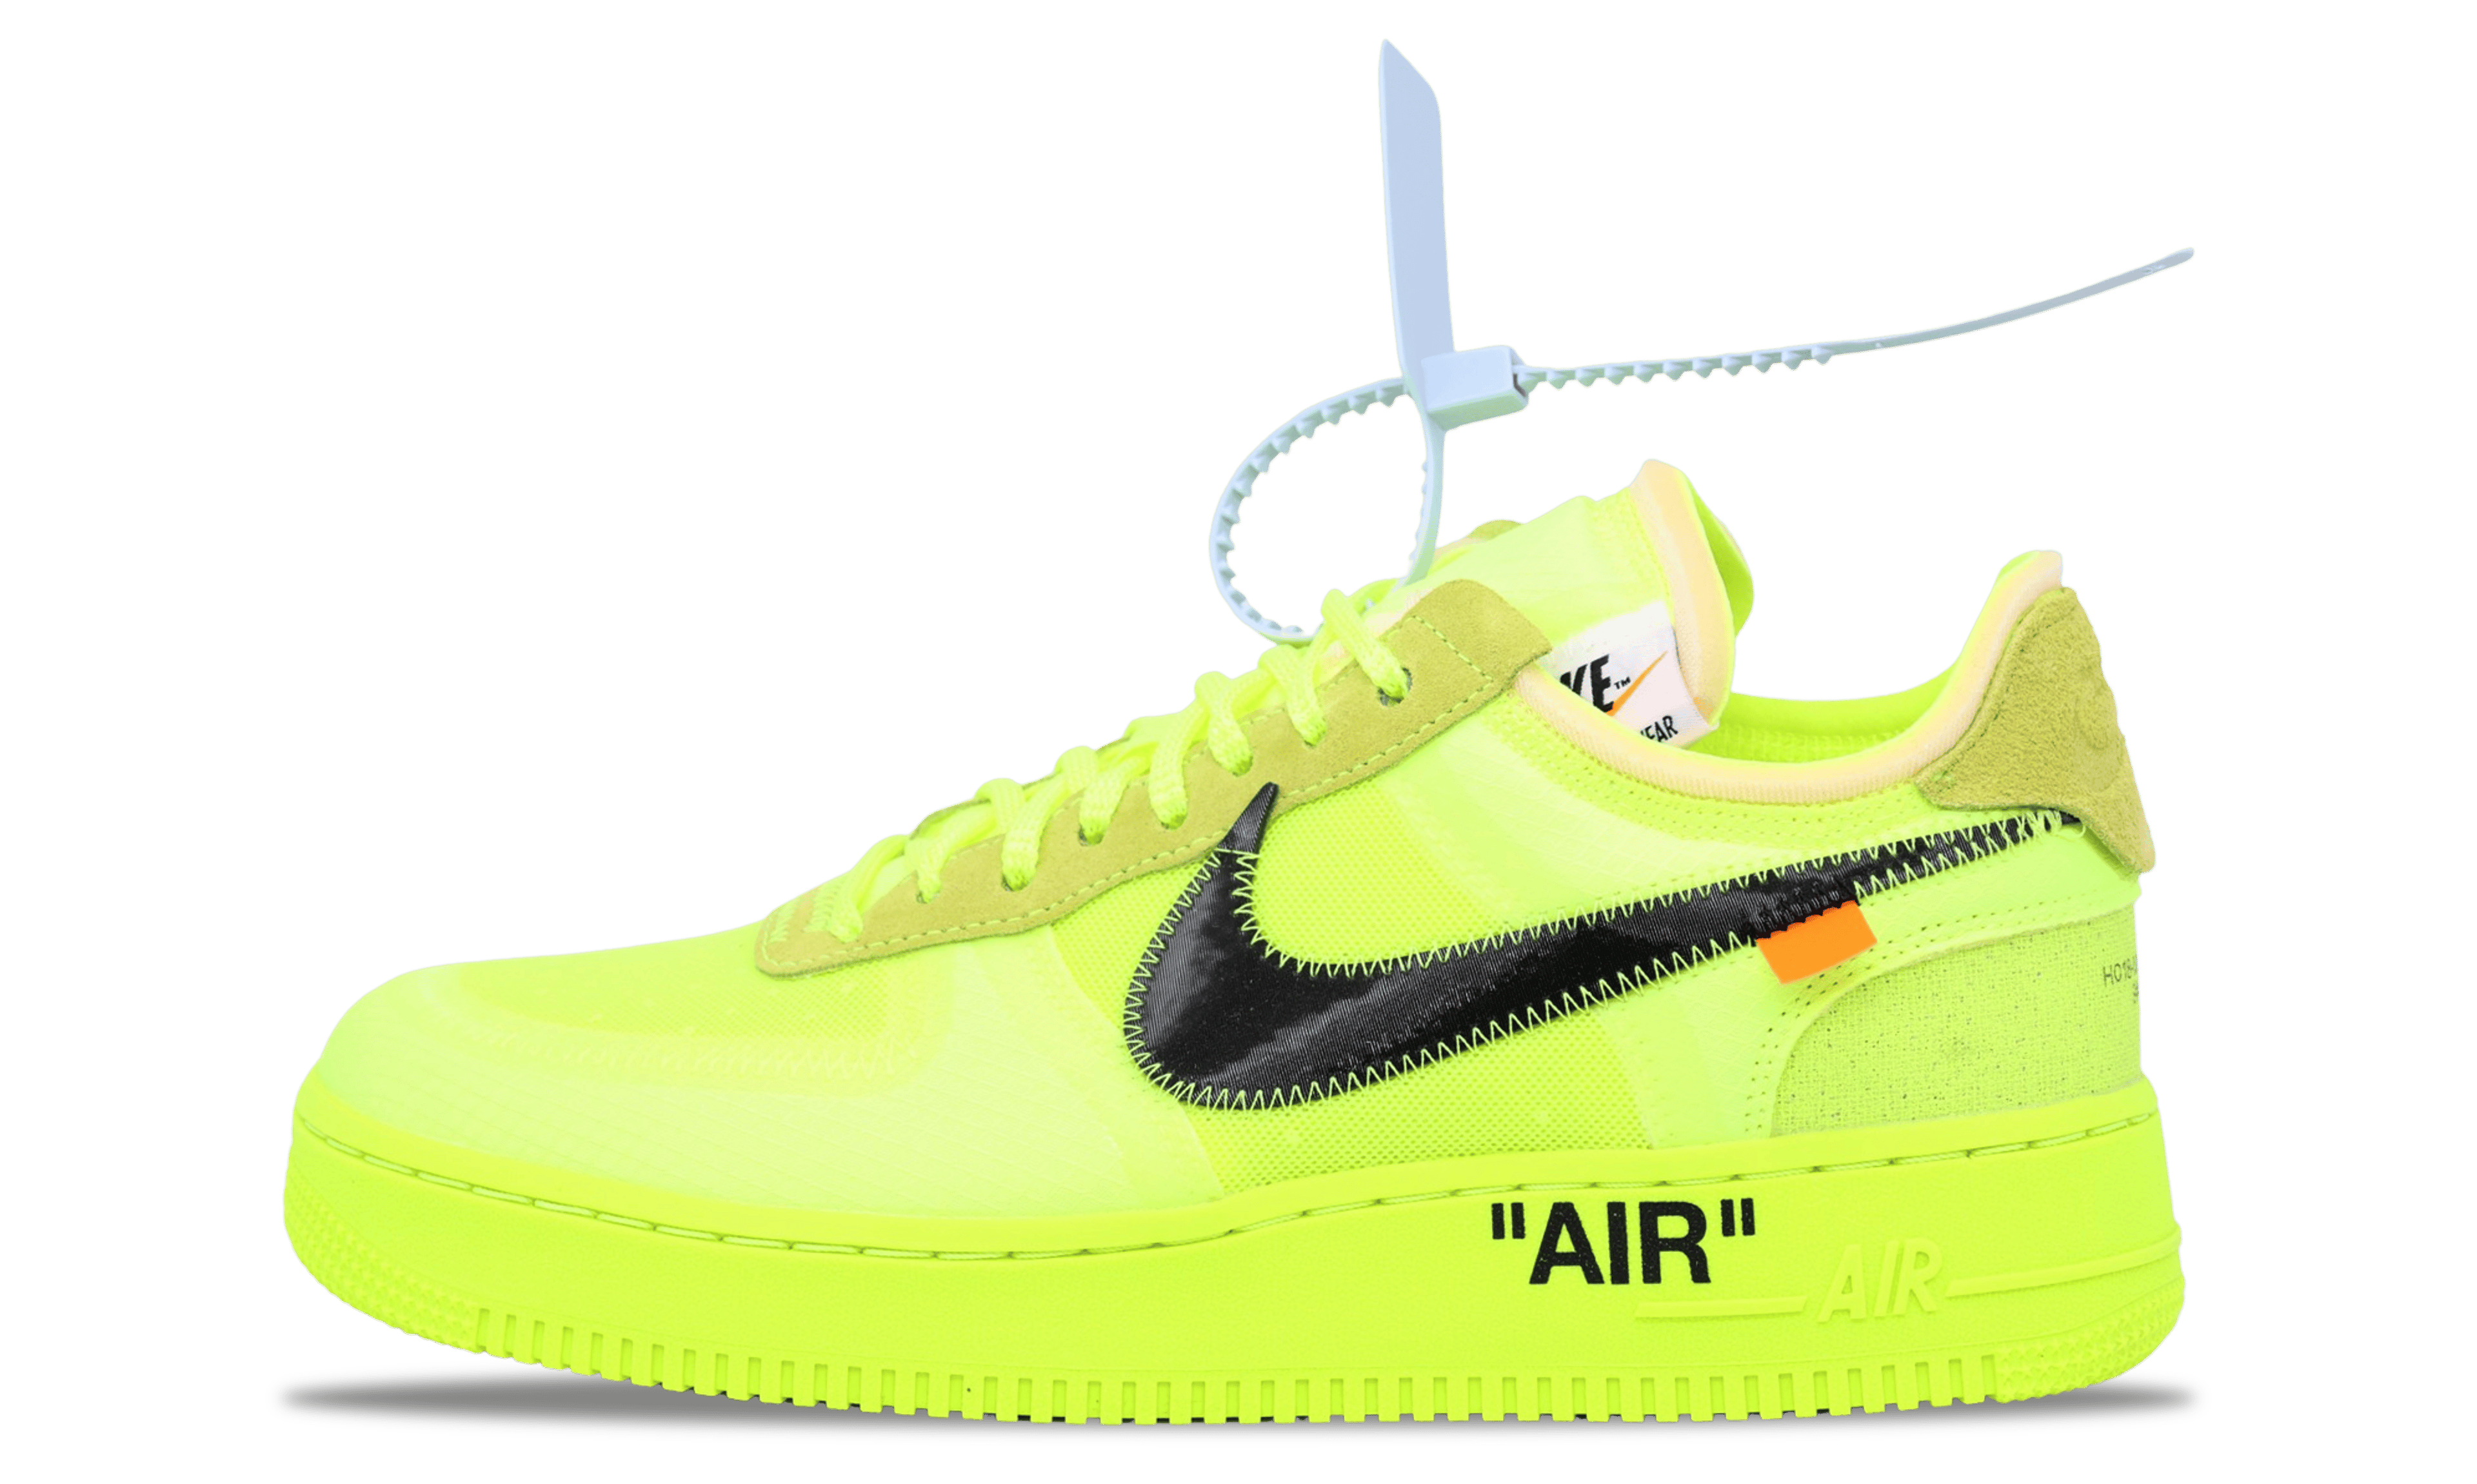 Nike Air Force 1 Low x OFF-WHITE Volt 2018 (AO4606-700) Men's Si